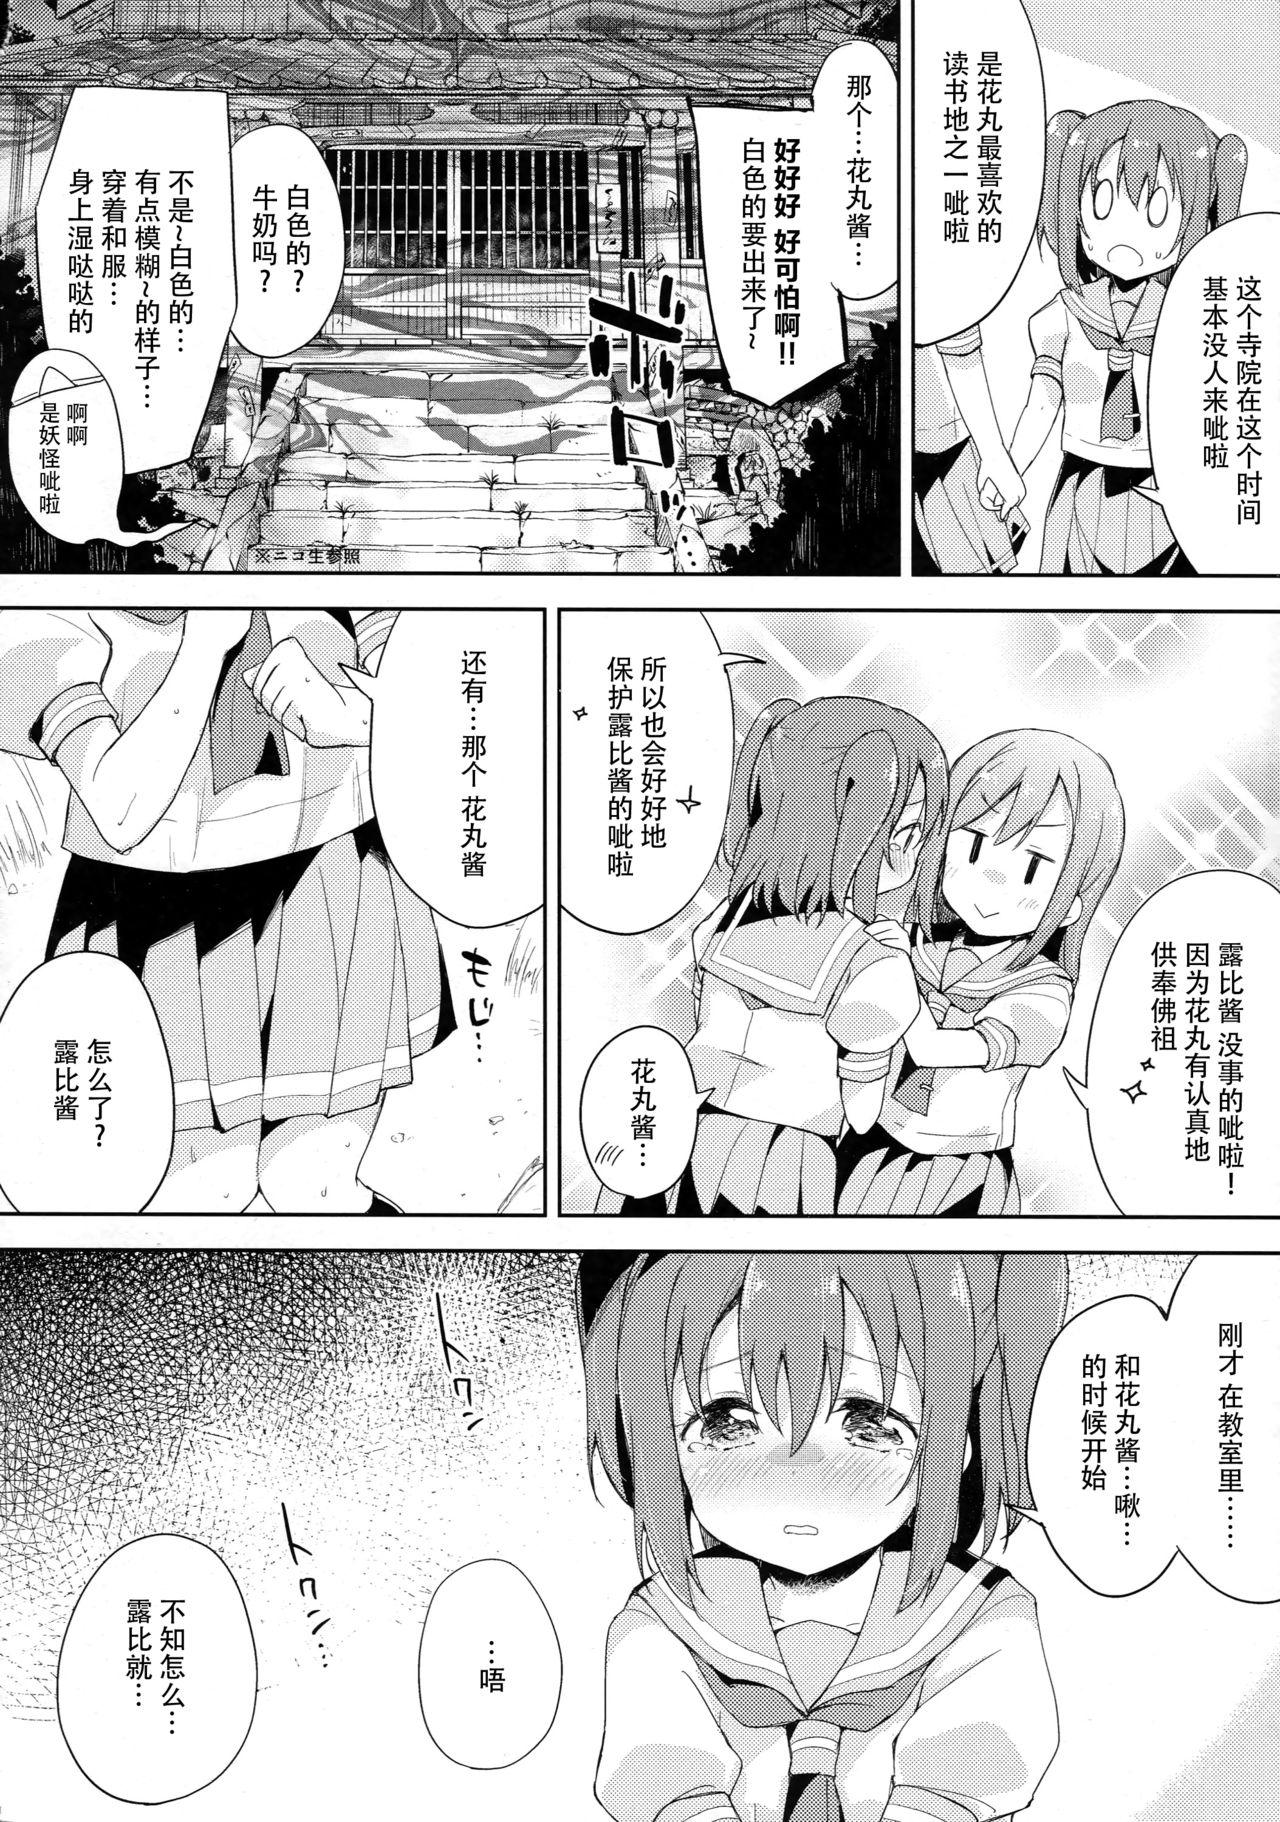 Officesex Yotogi-Zoushi - Love live sunshine Leite - Page 10